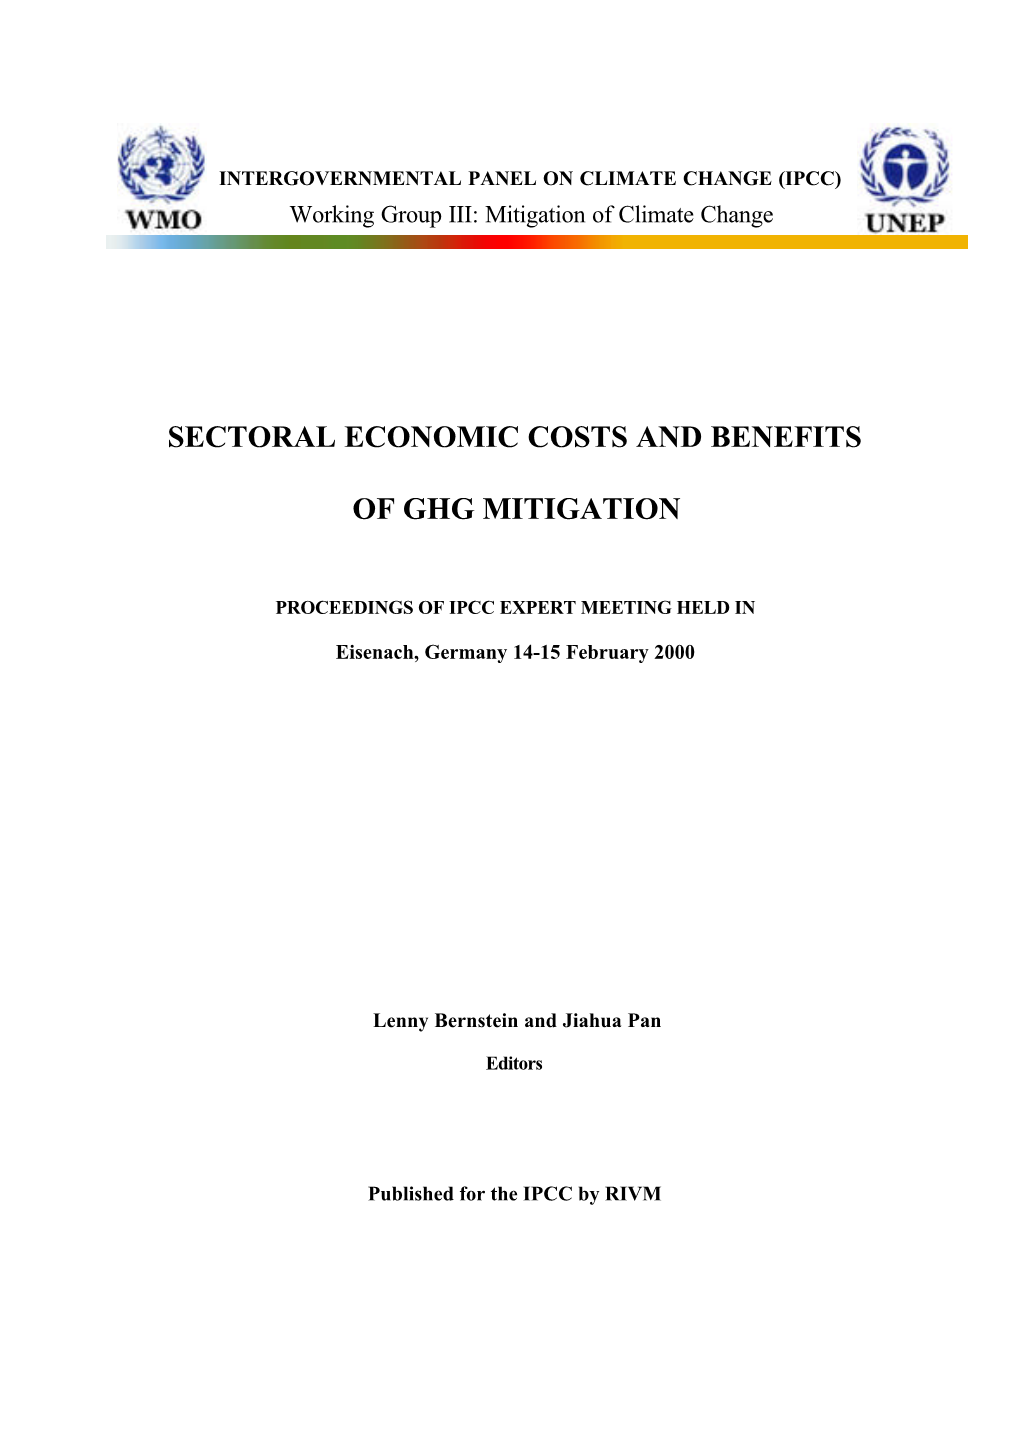 Sectoral Economic Costs and Benefits of GHG Mitigation Was Held in Eisenach, Germany, on 14 - 15 February 2000